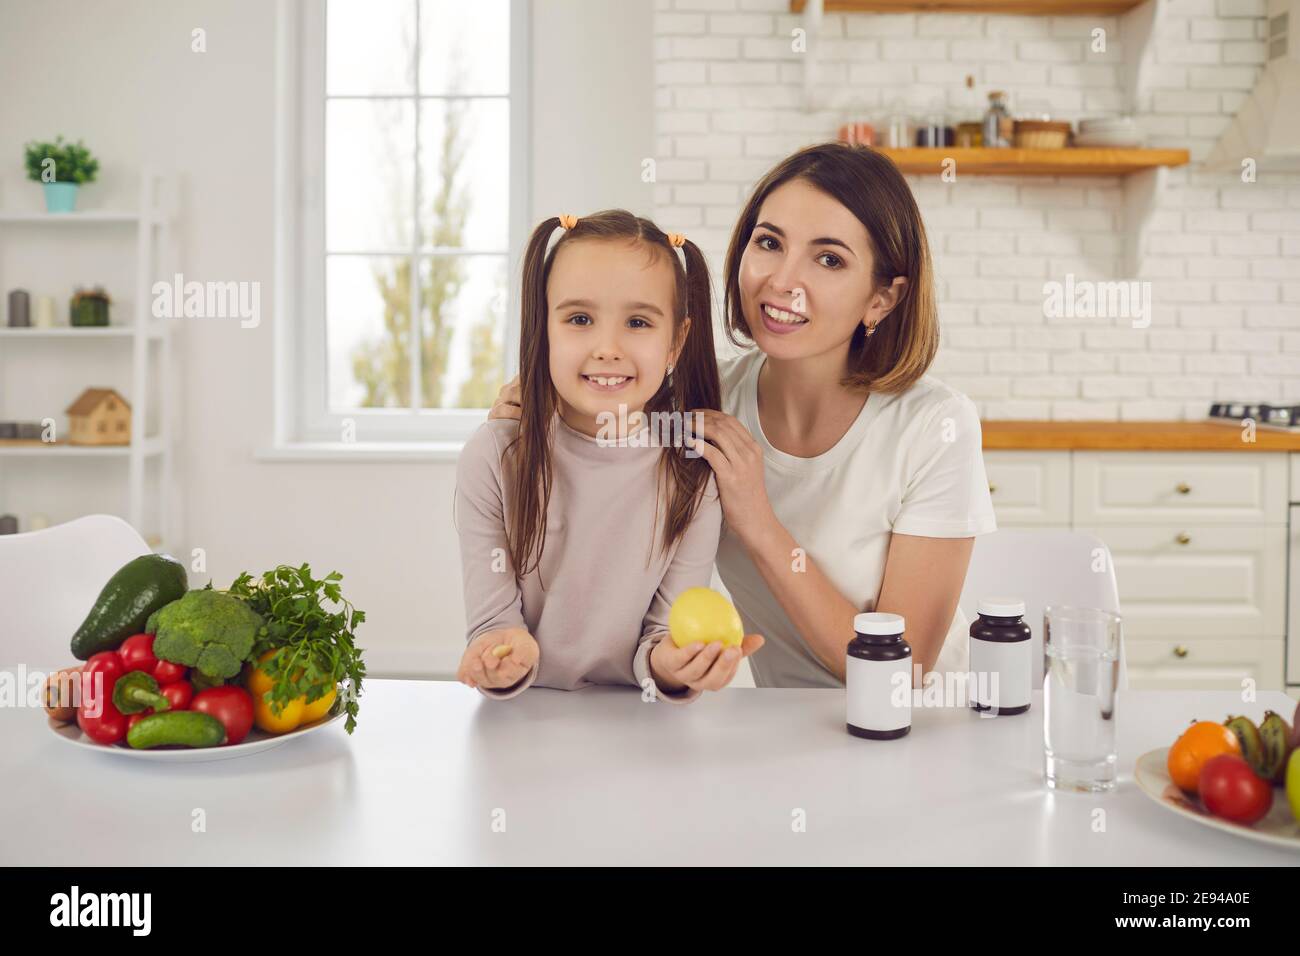 Happy mom and daughter at kitchen table with fruit, veggies and food supplements Stock Photo